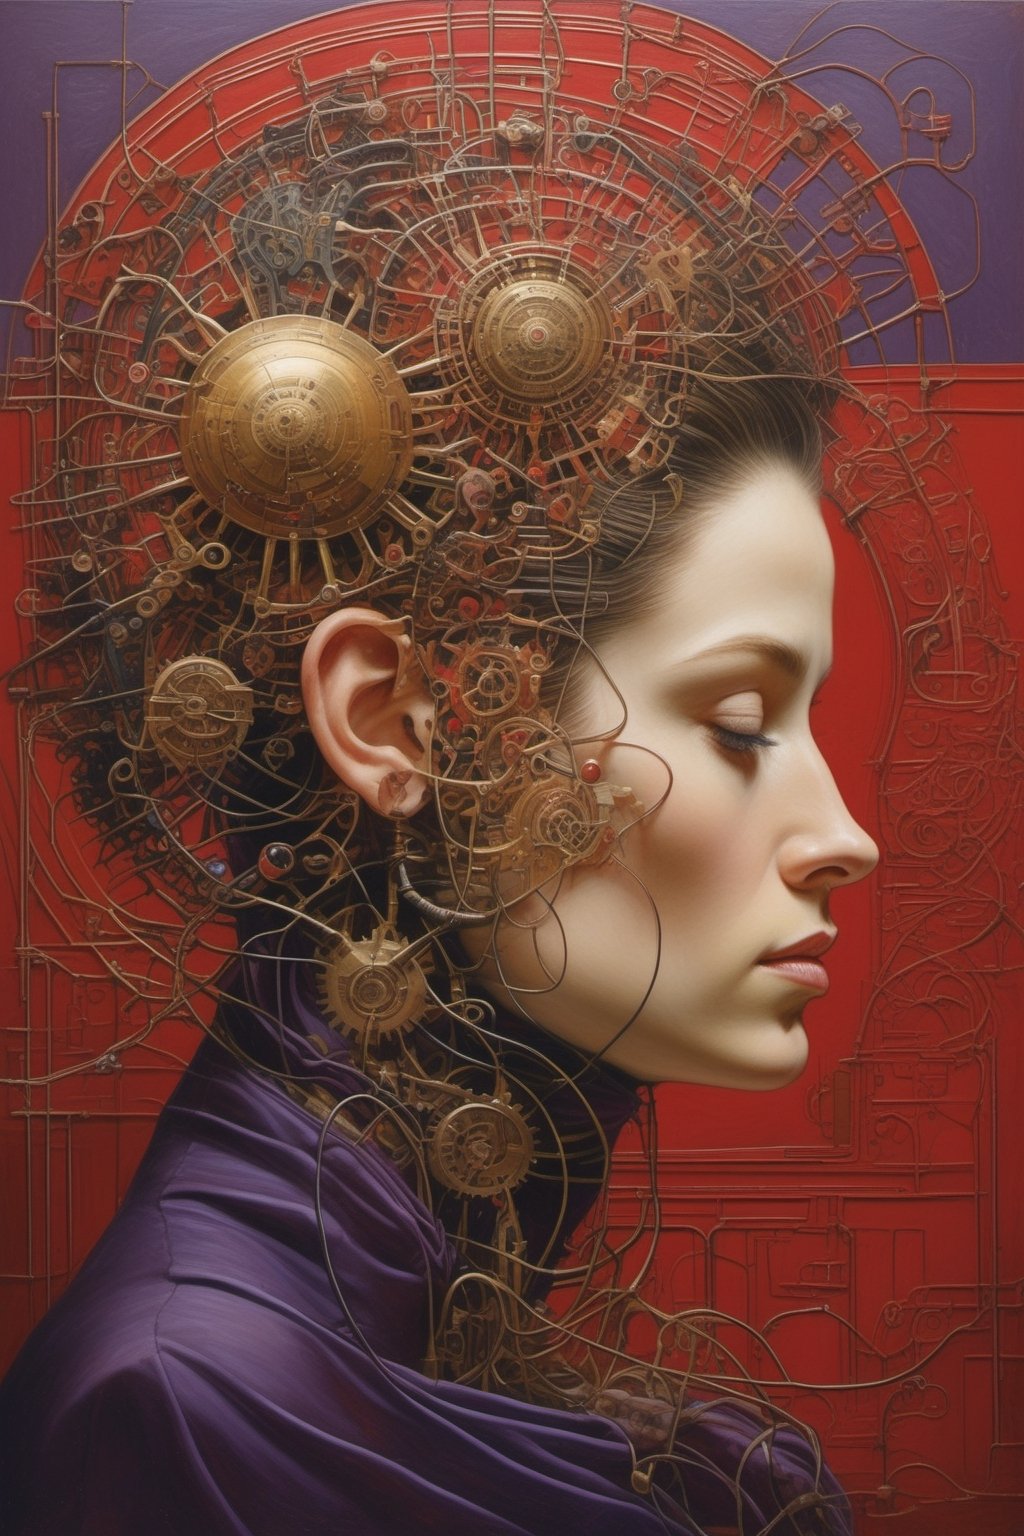 
a painting that features the profile of a human head, sectioned to reveal a complex interior structure. The head, which seems to be a fusion of organic and mechanical elements, has an open segment filled with an intricate lattice of wires, gears, and other mechanical components, resembling an elaborate machine or complex circuitry..
The scene presents a head encased in a spherical structure bristling with mechanical details. Wires or tubes extend from the head to the surrounding space, which resembles the interior of a grand yet desolate architectural space, possibly an abandoned futuristic temple or assembly. serene grace and dystopian complexity, inspired by Escher's paradoxical art and Gric's hyperrealistic style (gric style:1.15). The attire, flowing with Escher-inspired fabrics, shifts between soothing azure and ominous dark purples, accented with deep tones of red. This scene unfolds in a mystical garden that merges enchanting twilight hues with an eerie, moonlit forest ambiance. The model, positioned at the heart of this juxtaposition, wears an outfit that captures the ethereal beauty of serene dreams while echoing the sinuous lines of a nightmarish landscape. The surrounding foliage is lush yet ghostly, alive with a mix of tranquil and unsettling energies. The lighting, a blend of soft, ambient twilight and subtle, uncanny glows, casts the face in a light that is both tranquil and haunting. The expression captures a profound contemplation, an otherworldly elegance touched by a sense of dark, macabre beauty. This portrait, embodying both peaceful serenity and dark allure, plays with perspective and fluidity, contrasting the structured complexity of fashion with the effortless, albeit eerie, grace of nature. The color palette, rich in dark purples and varying shades of red, adds depth and intensity to this hyperrealistic
PORTRAIT PHOTO,stalker, very specific pose ,Gric, Aligned eyes,  Iridescent Eyes,  (blush,  eye_wrinkles:0.6),  (((textured skin))), (goosebumps:0.5),  subsurface scattering,  ((skin pores)),  (detailed skin texture),  (( textured skin)),  realistic dull (skin noise),  visible skin detail,  skin fuzz,  dry skin,  hyperdetailed face,  sharp picture,  sharp detailed,  (((analog grainy photo vintage))),  Rembrandt lighting,  ultra focus,  illuminated face,  detailed face,  8k resolution,